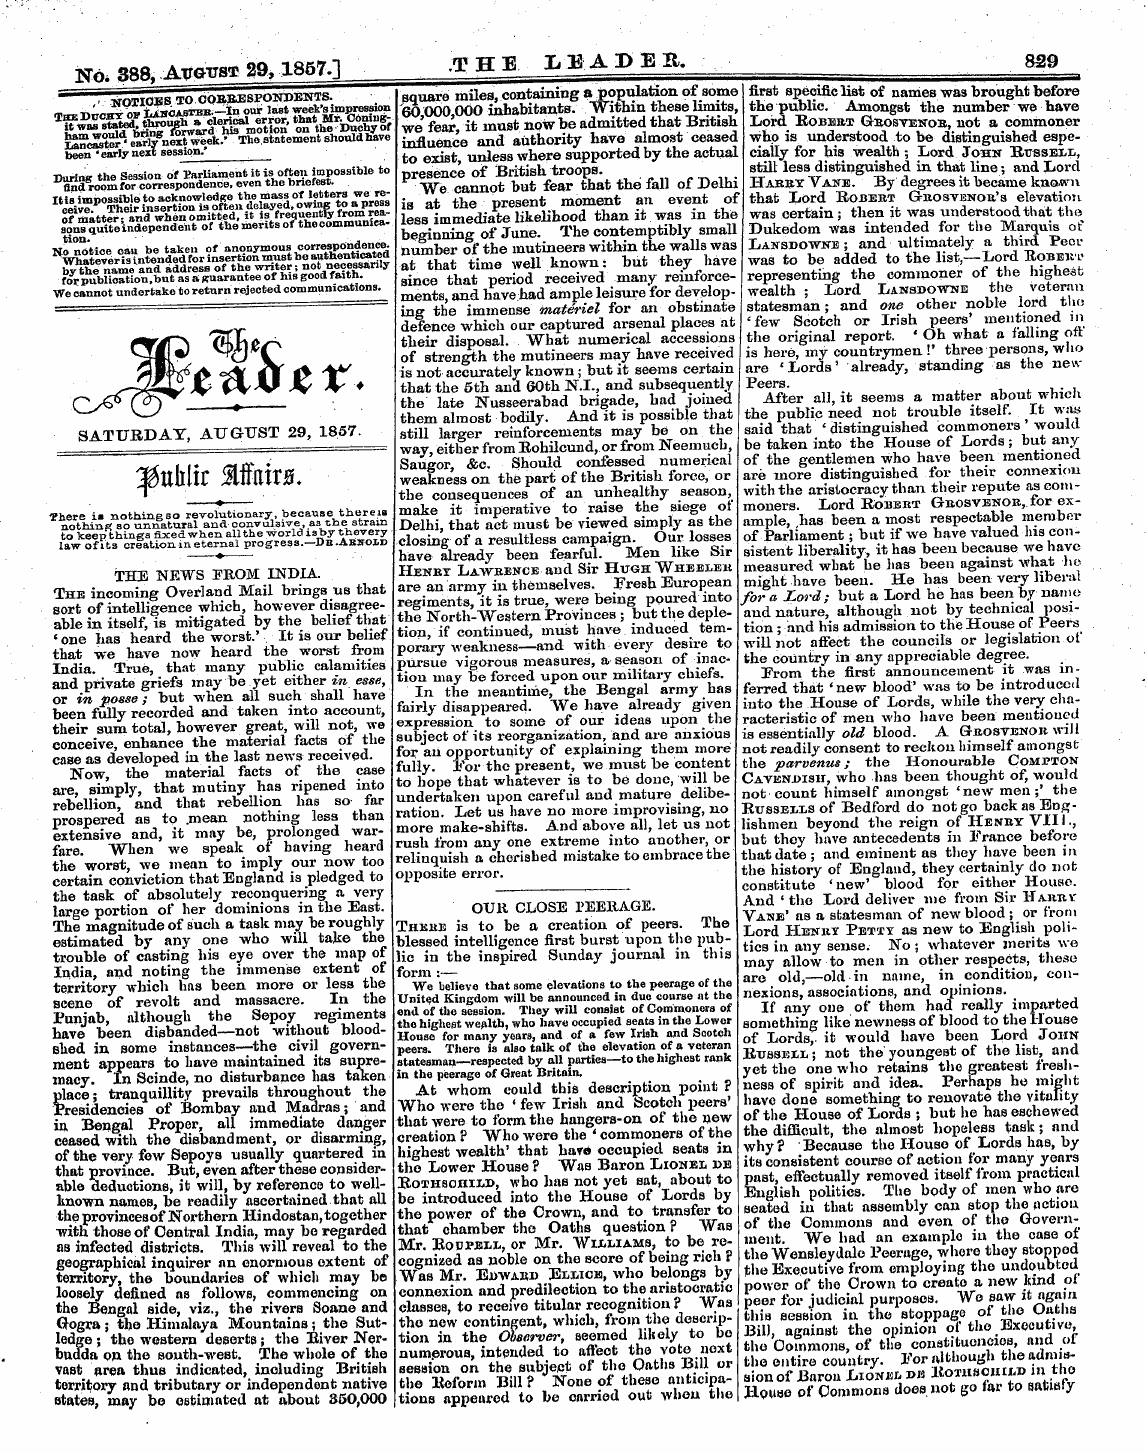 Leader (1850-1860): jS F Y, 2nd edition - Saturday, August 29, 1857.